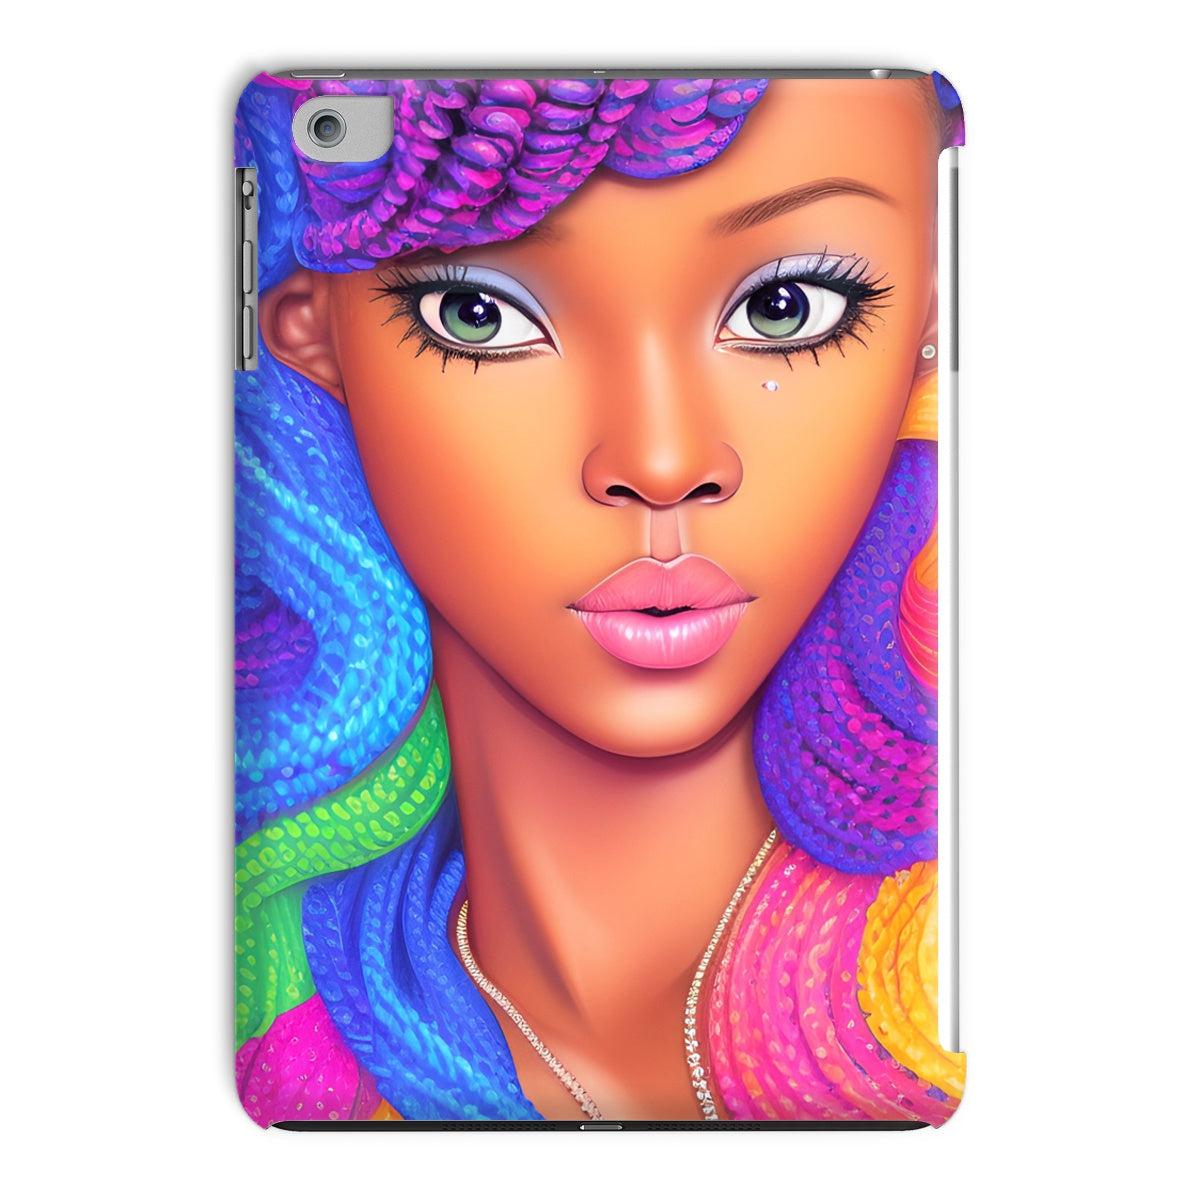 Barbie Braided Tablet Cases